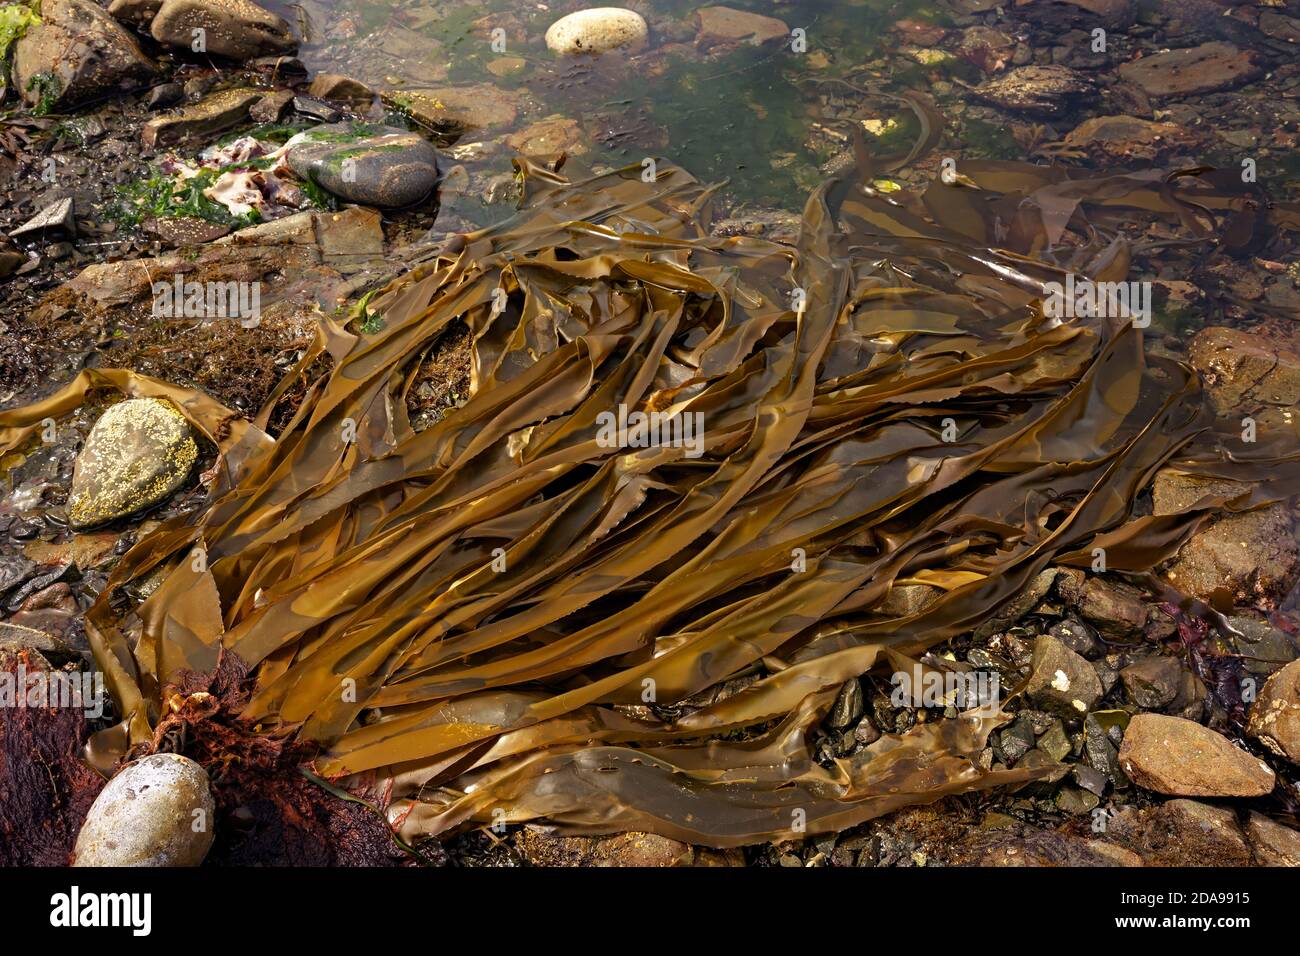 WA18014-00...WASHINGTON - Bull kelp in a tide pool at low tide along the wilderness coast area of Olympic National Park. Stock Photo